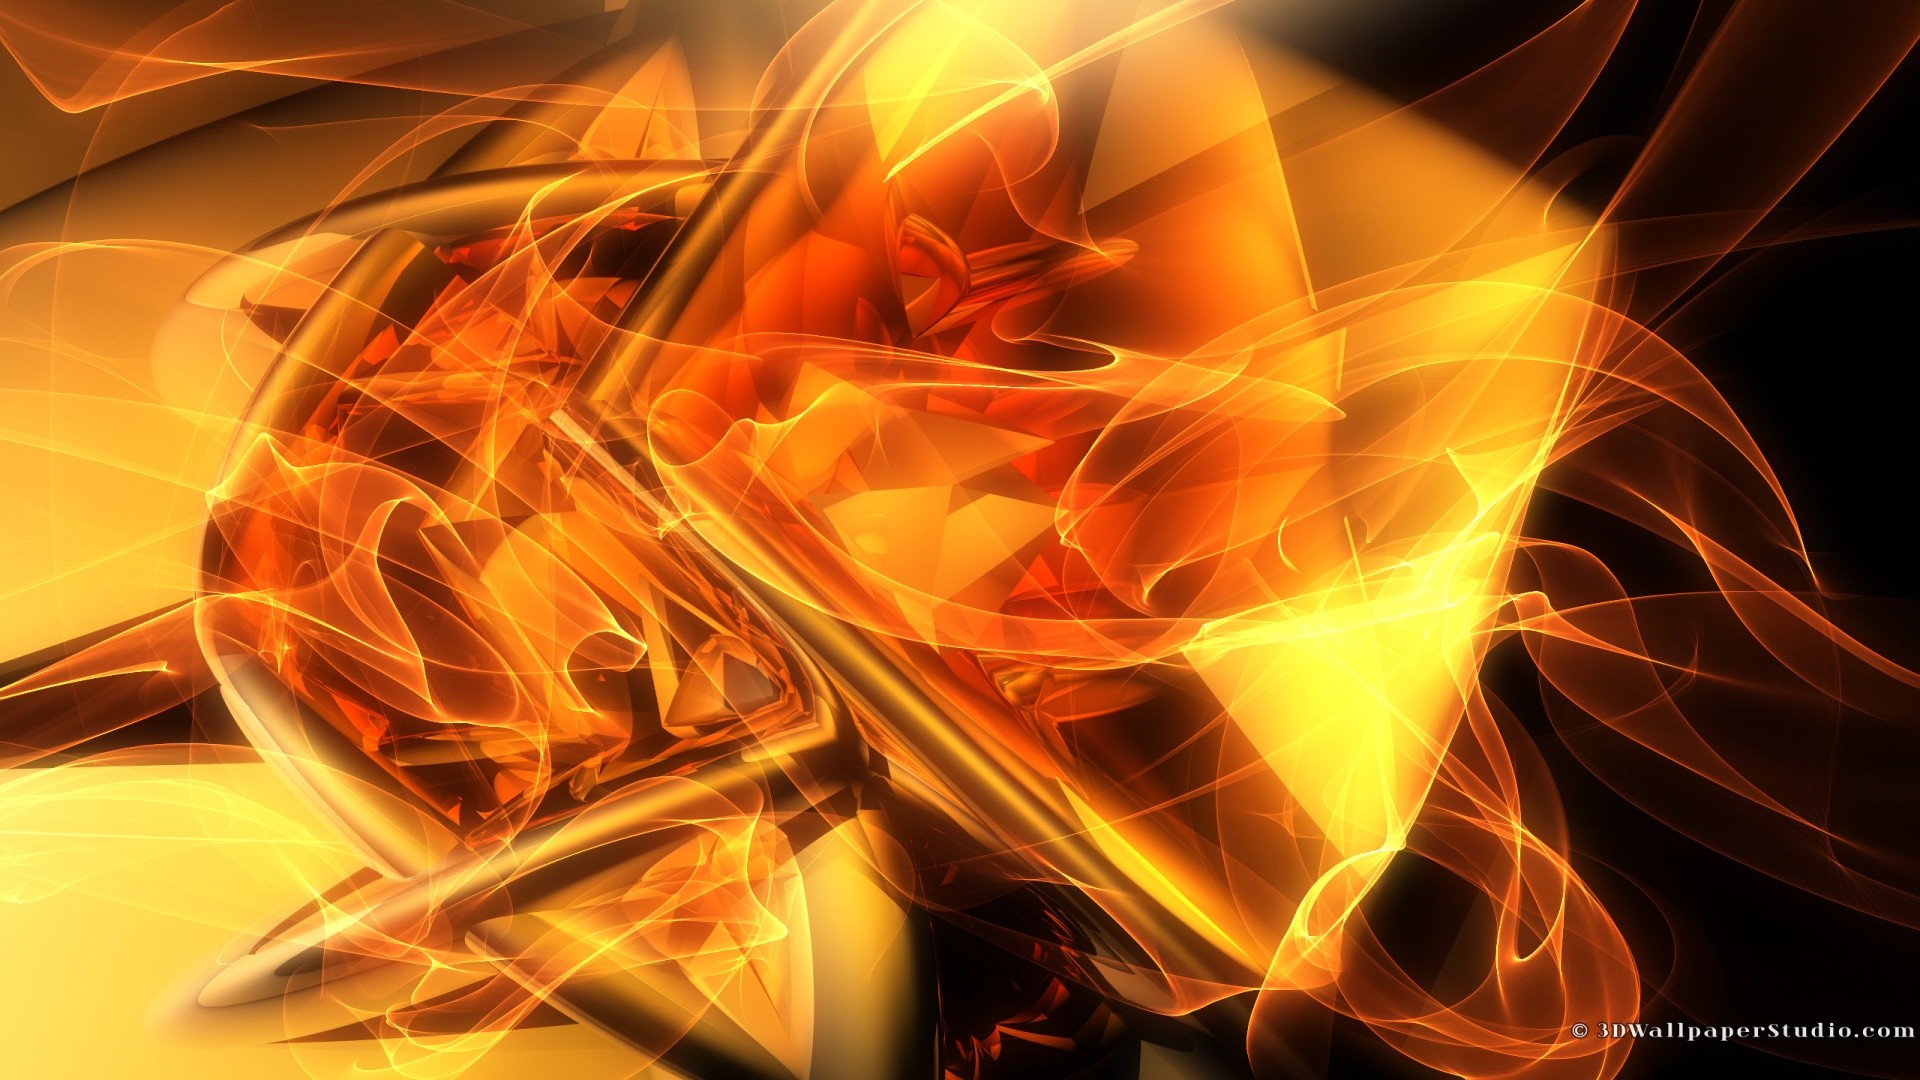 Beautiful 3D Abstract Gold HD Wallpaper Image Picture Free